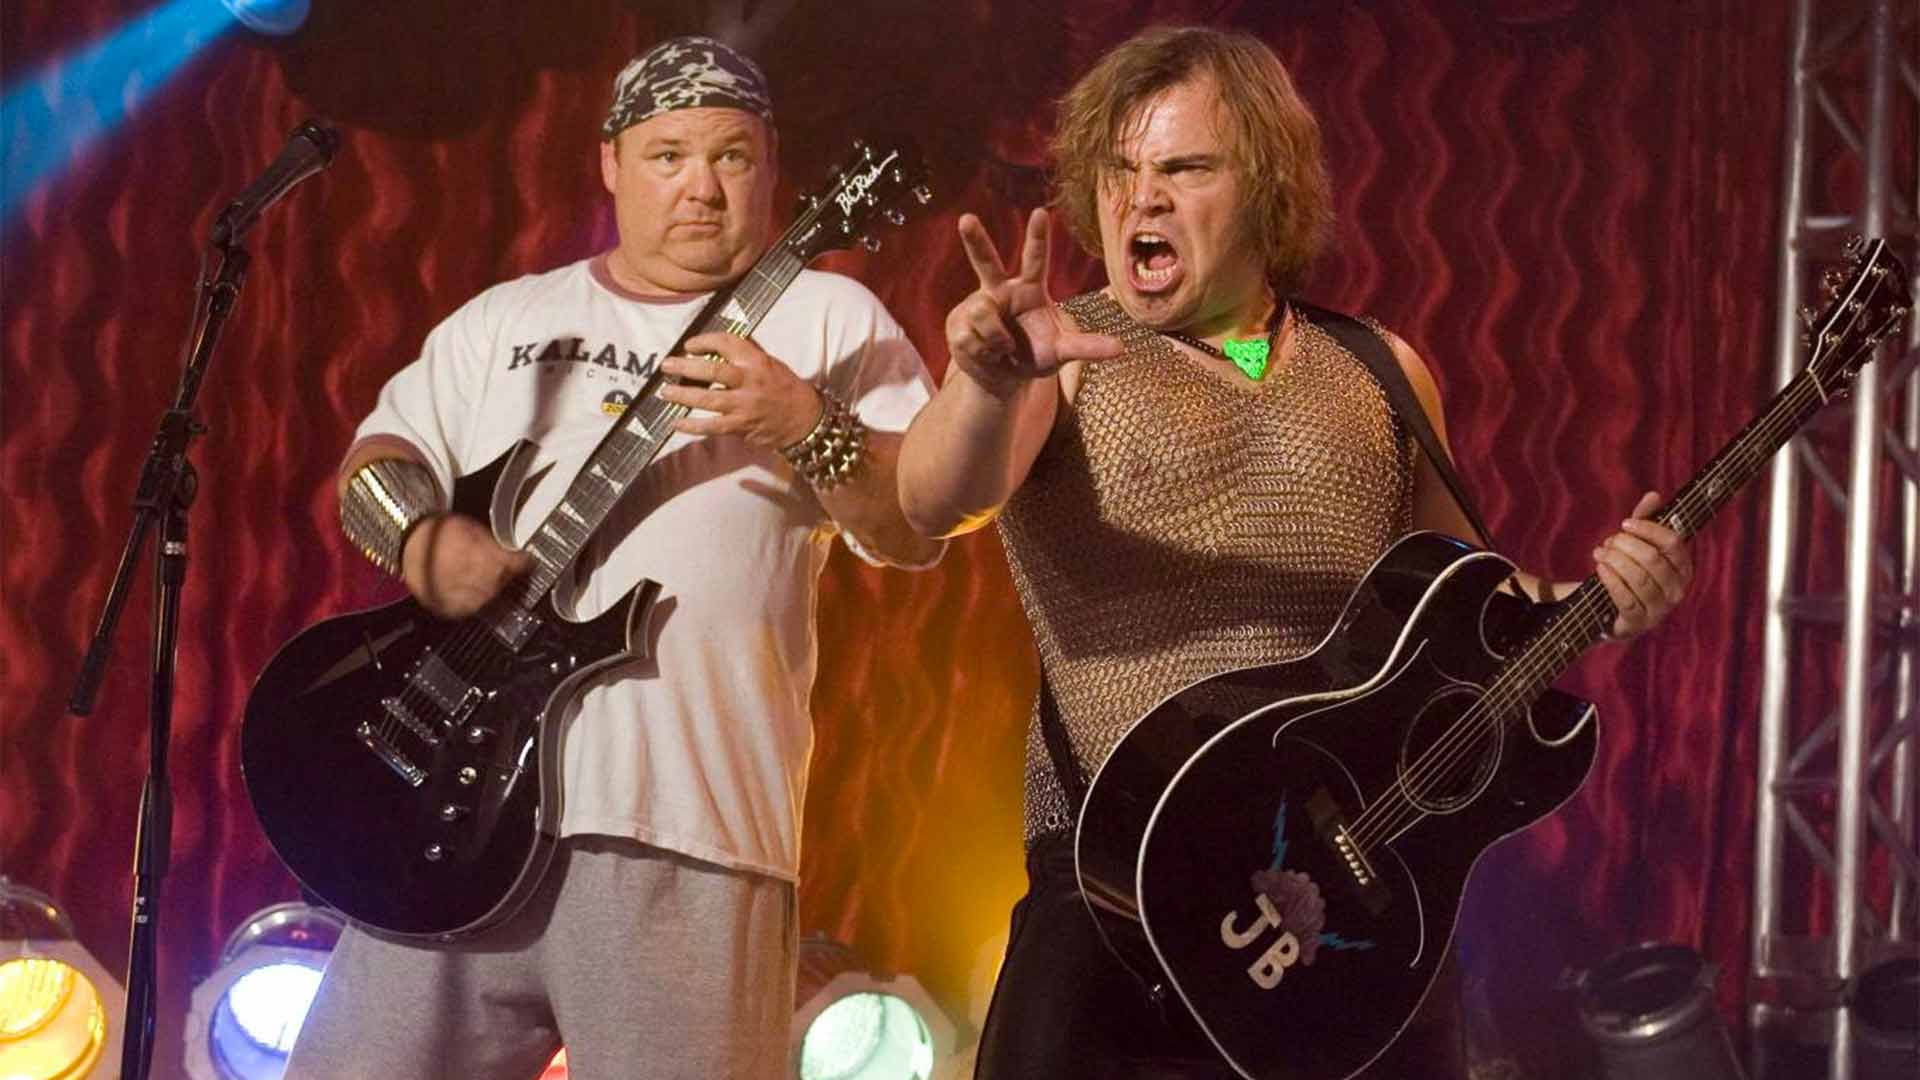 The 10 Funniest Movies About Rock Bands Ifc Blog Ifc